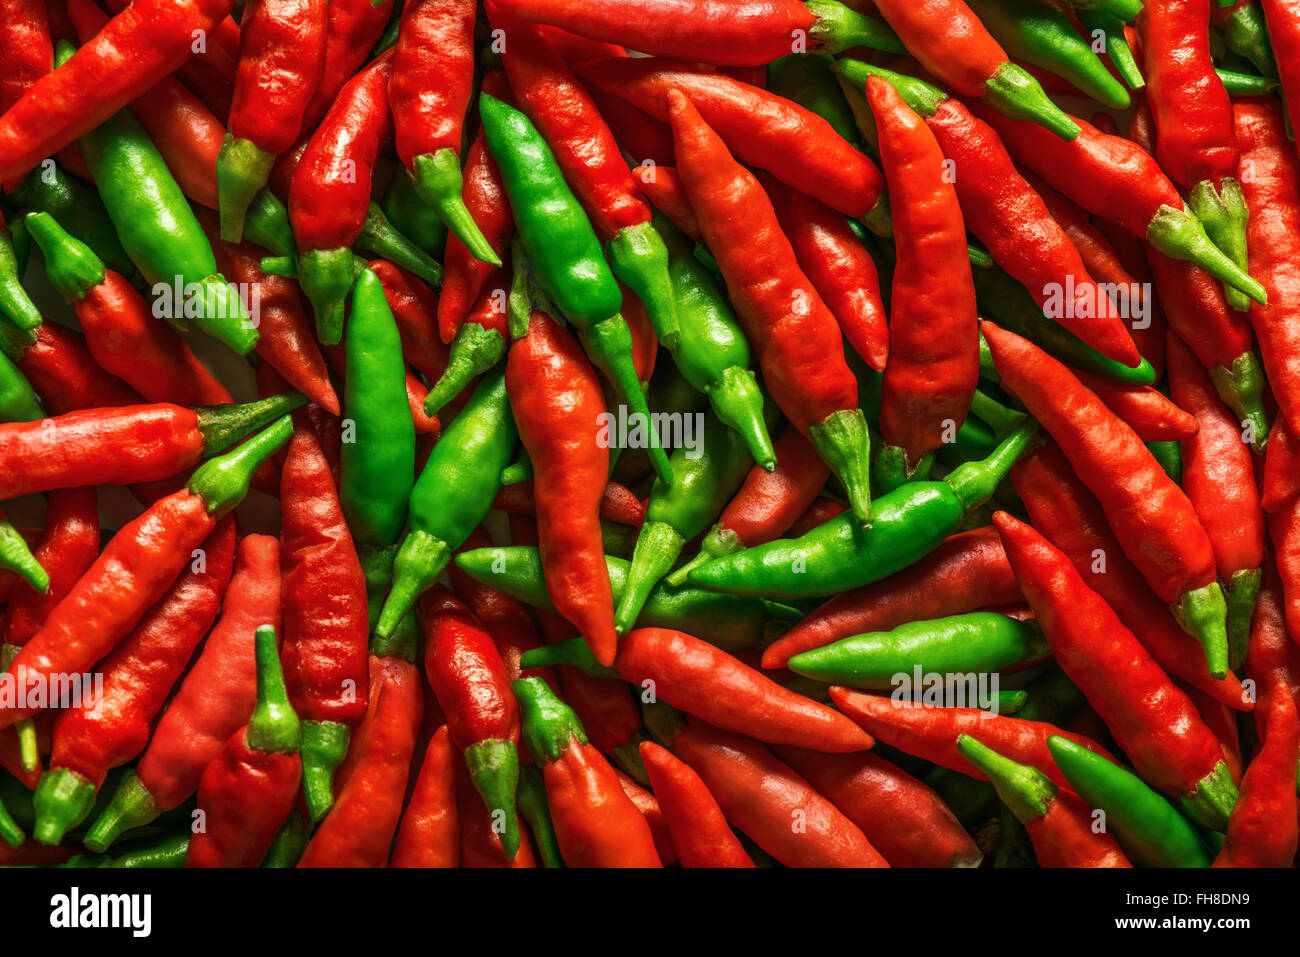 Red and green pepper over flat surface. Stock Photo